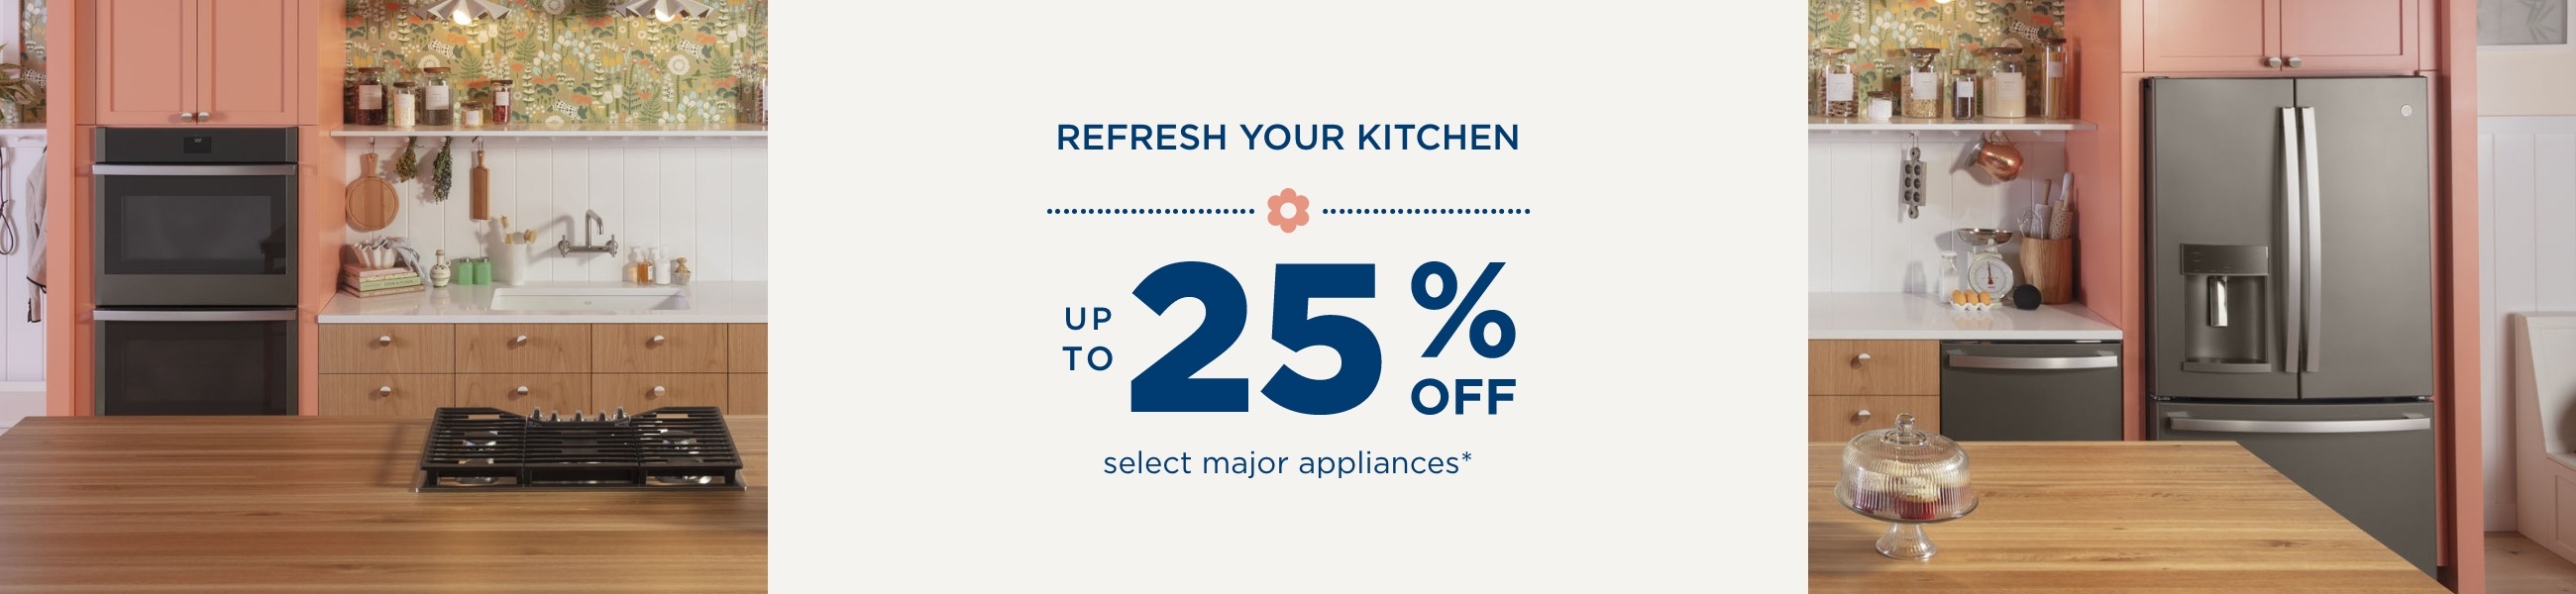 Refresh Your Kitchen - Up to 25% OFF select major appliances